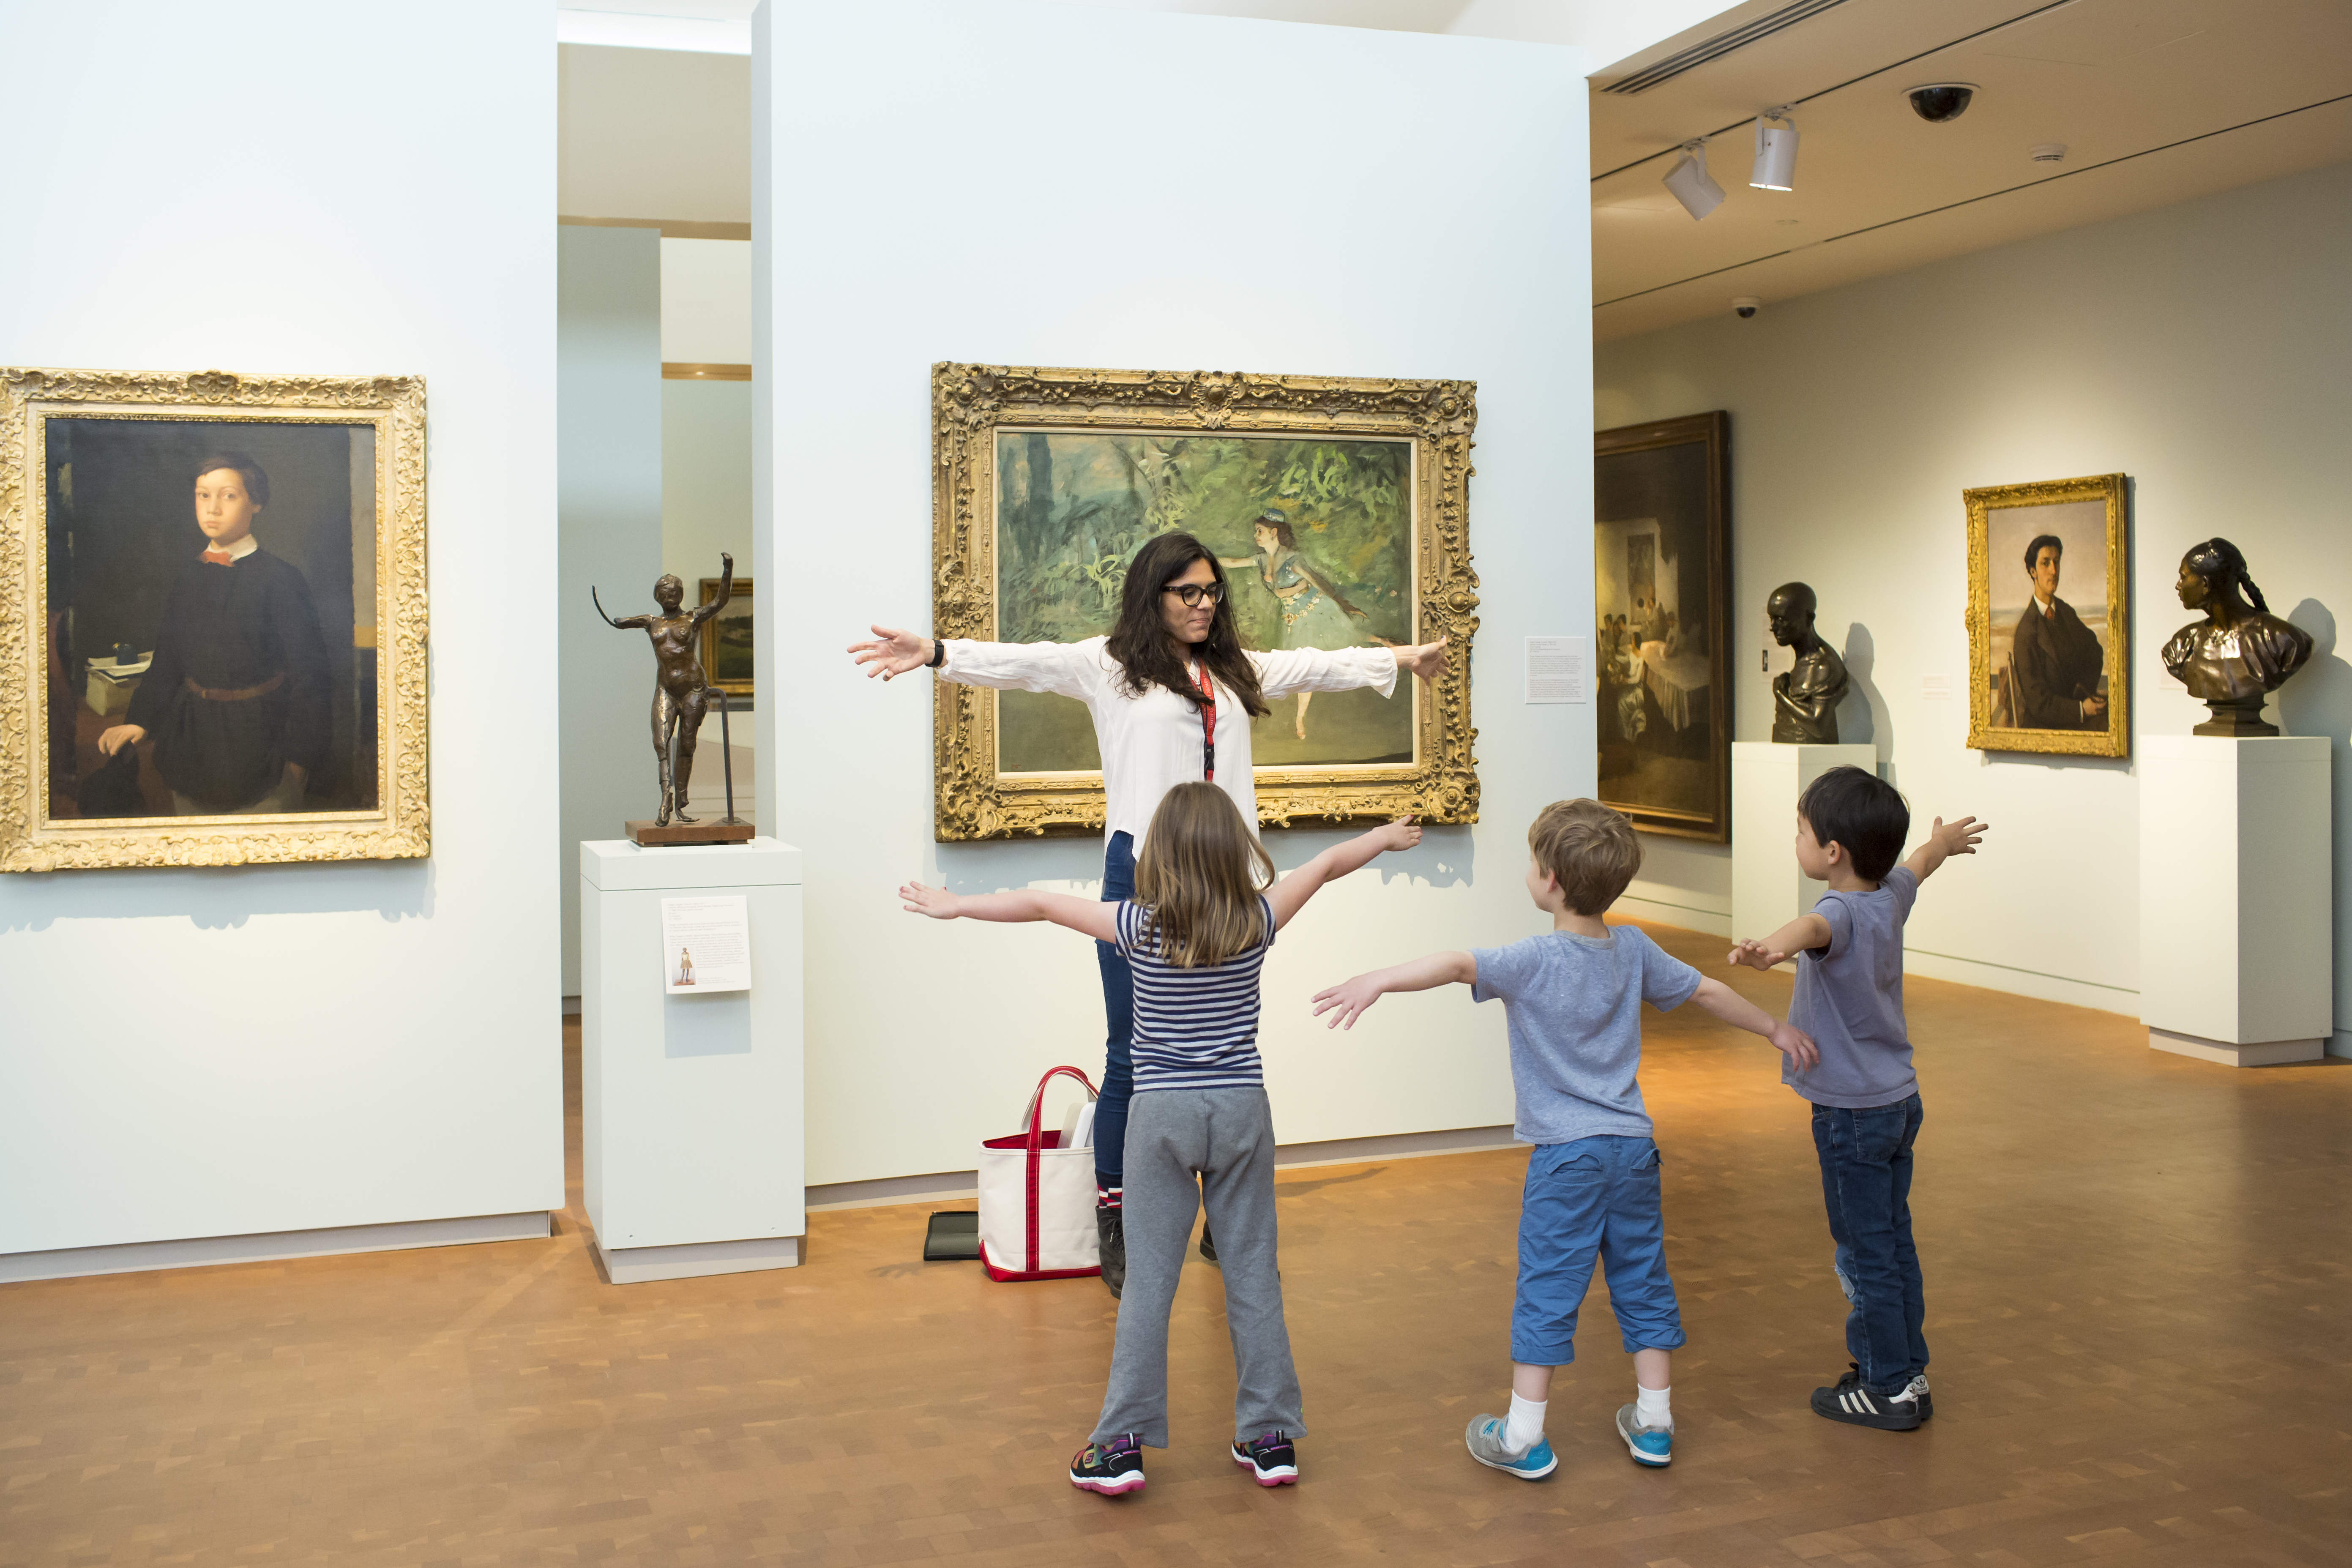 Museum educator in front of paitning with young kids, mimicking the figure in the painting